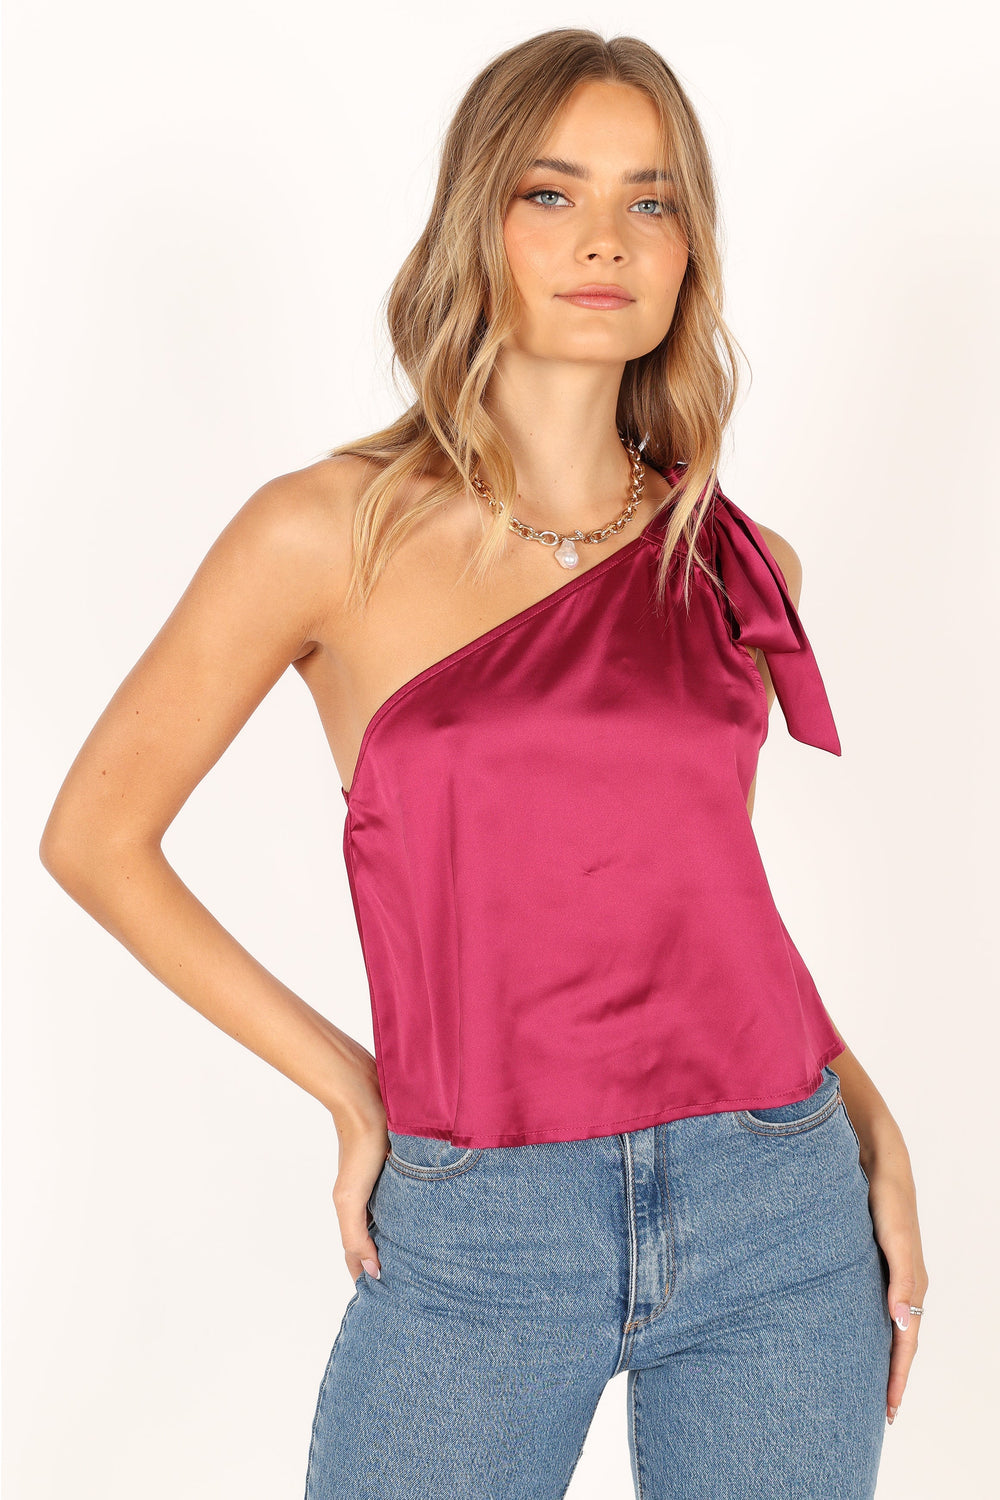 Petal and Pup USA TOPS Audrey One Shoulder Top - Berry